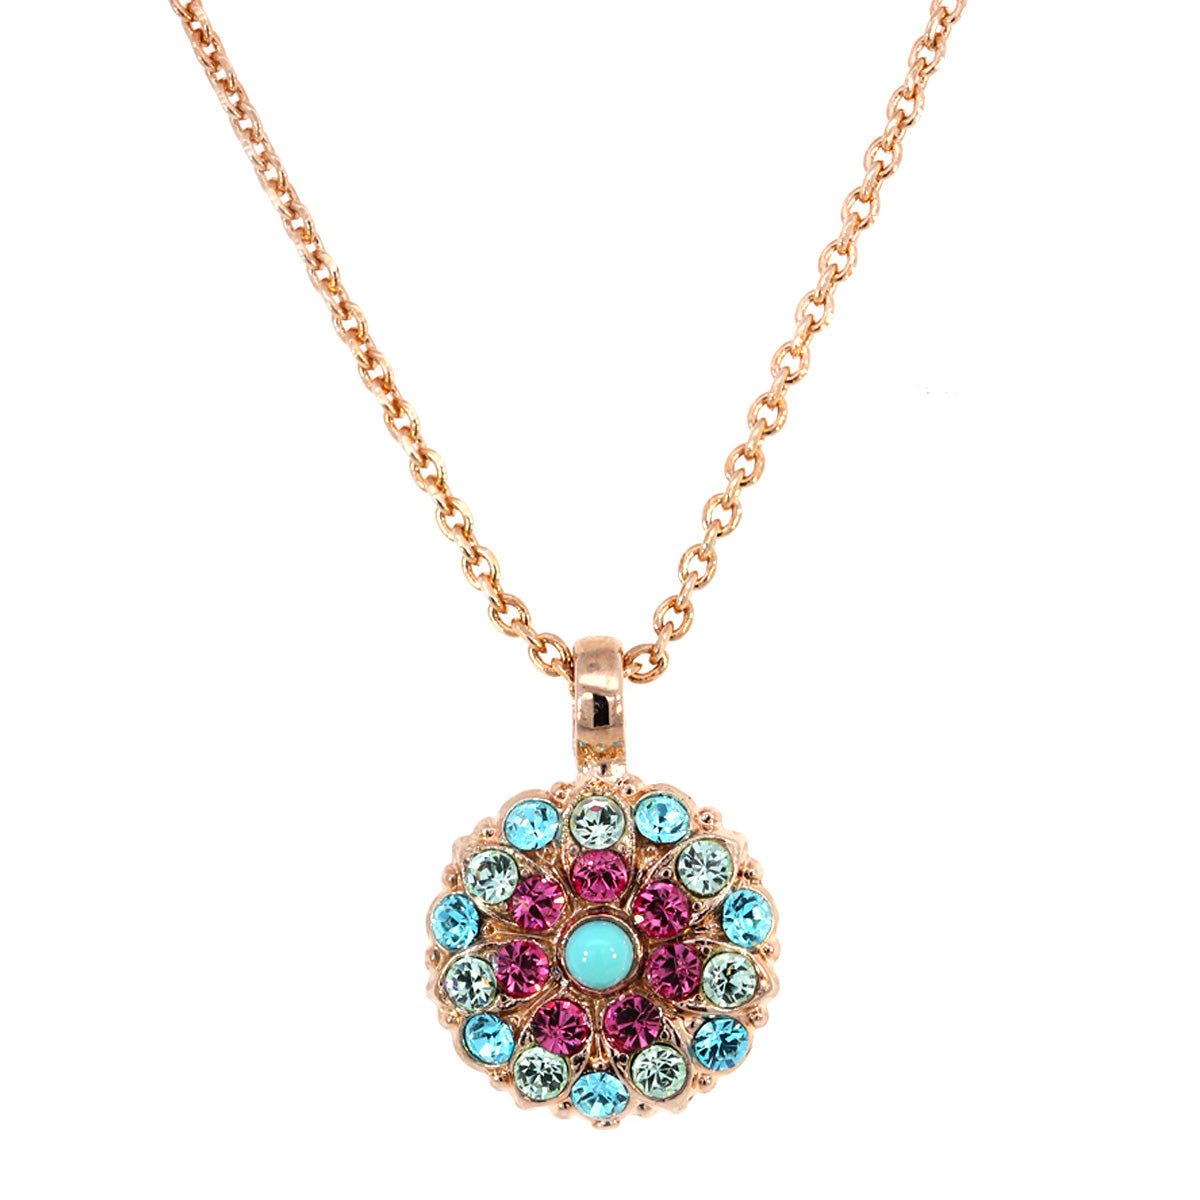 Mariana Let The Sun Shine Necklace N-5212 5003